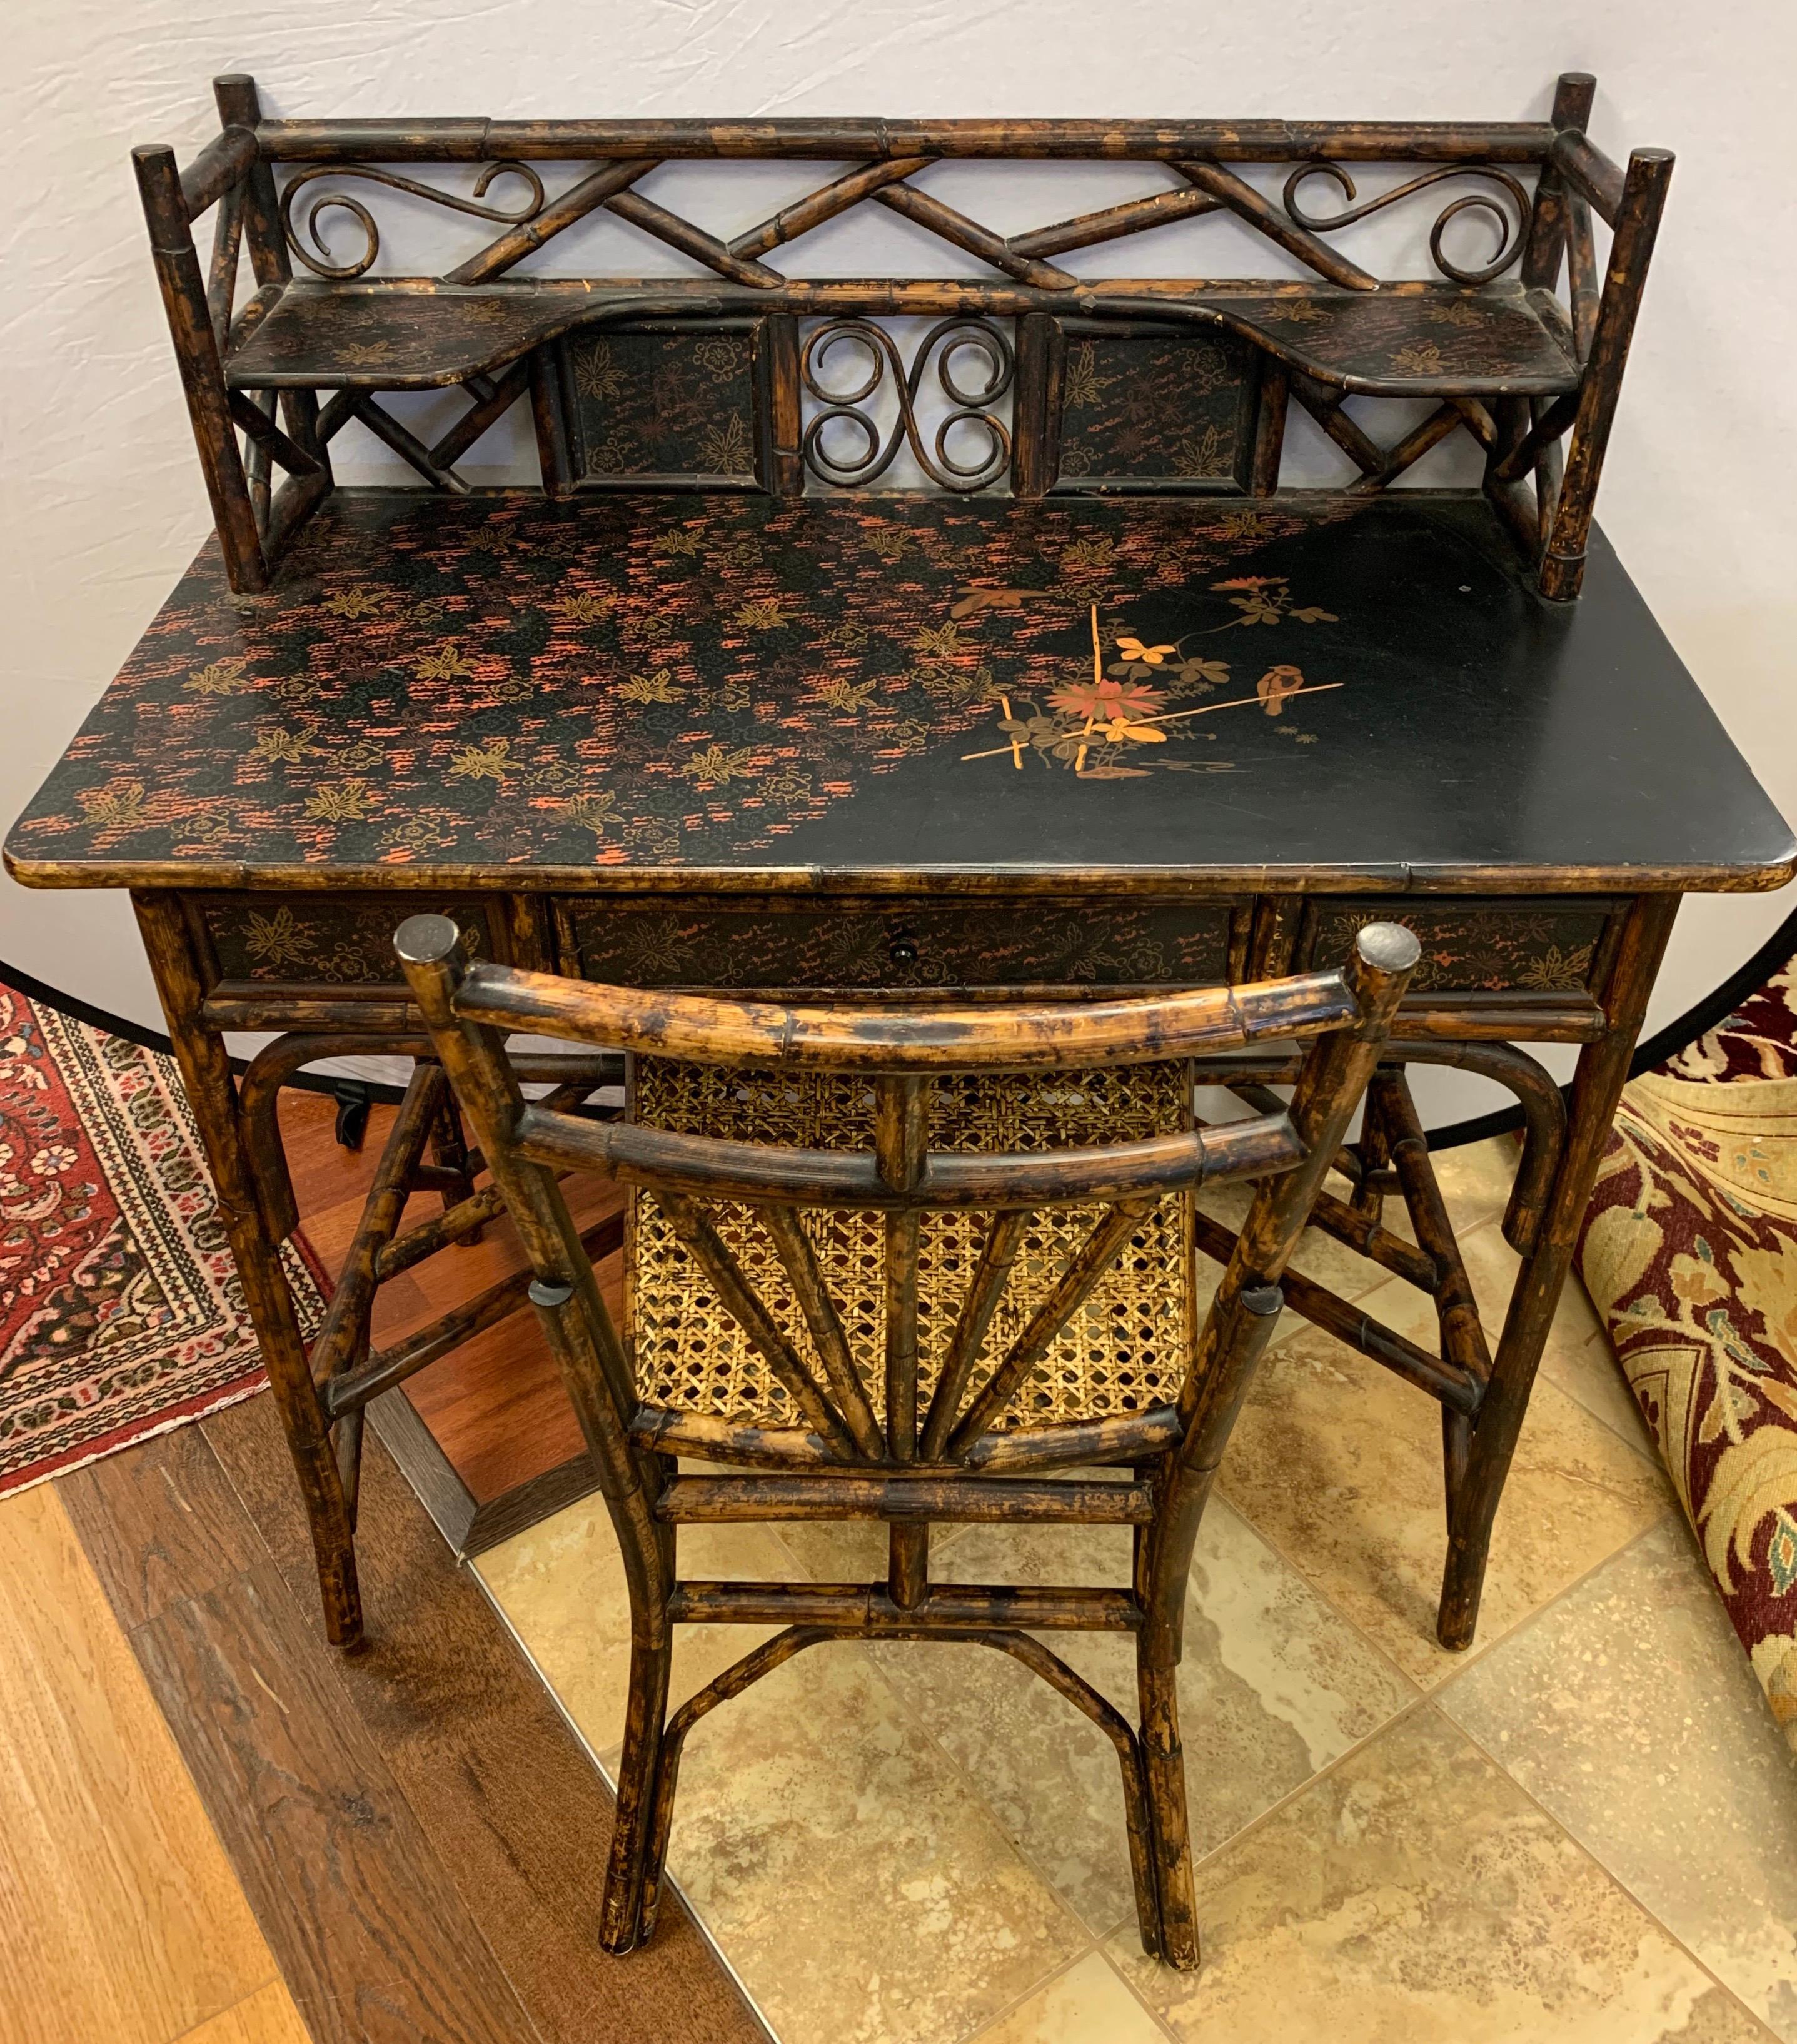 Coveted antique bamboo chinoiserie writing desk set with table and chair. The desk top is hand painted and gorgeous, circa late 19th century.